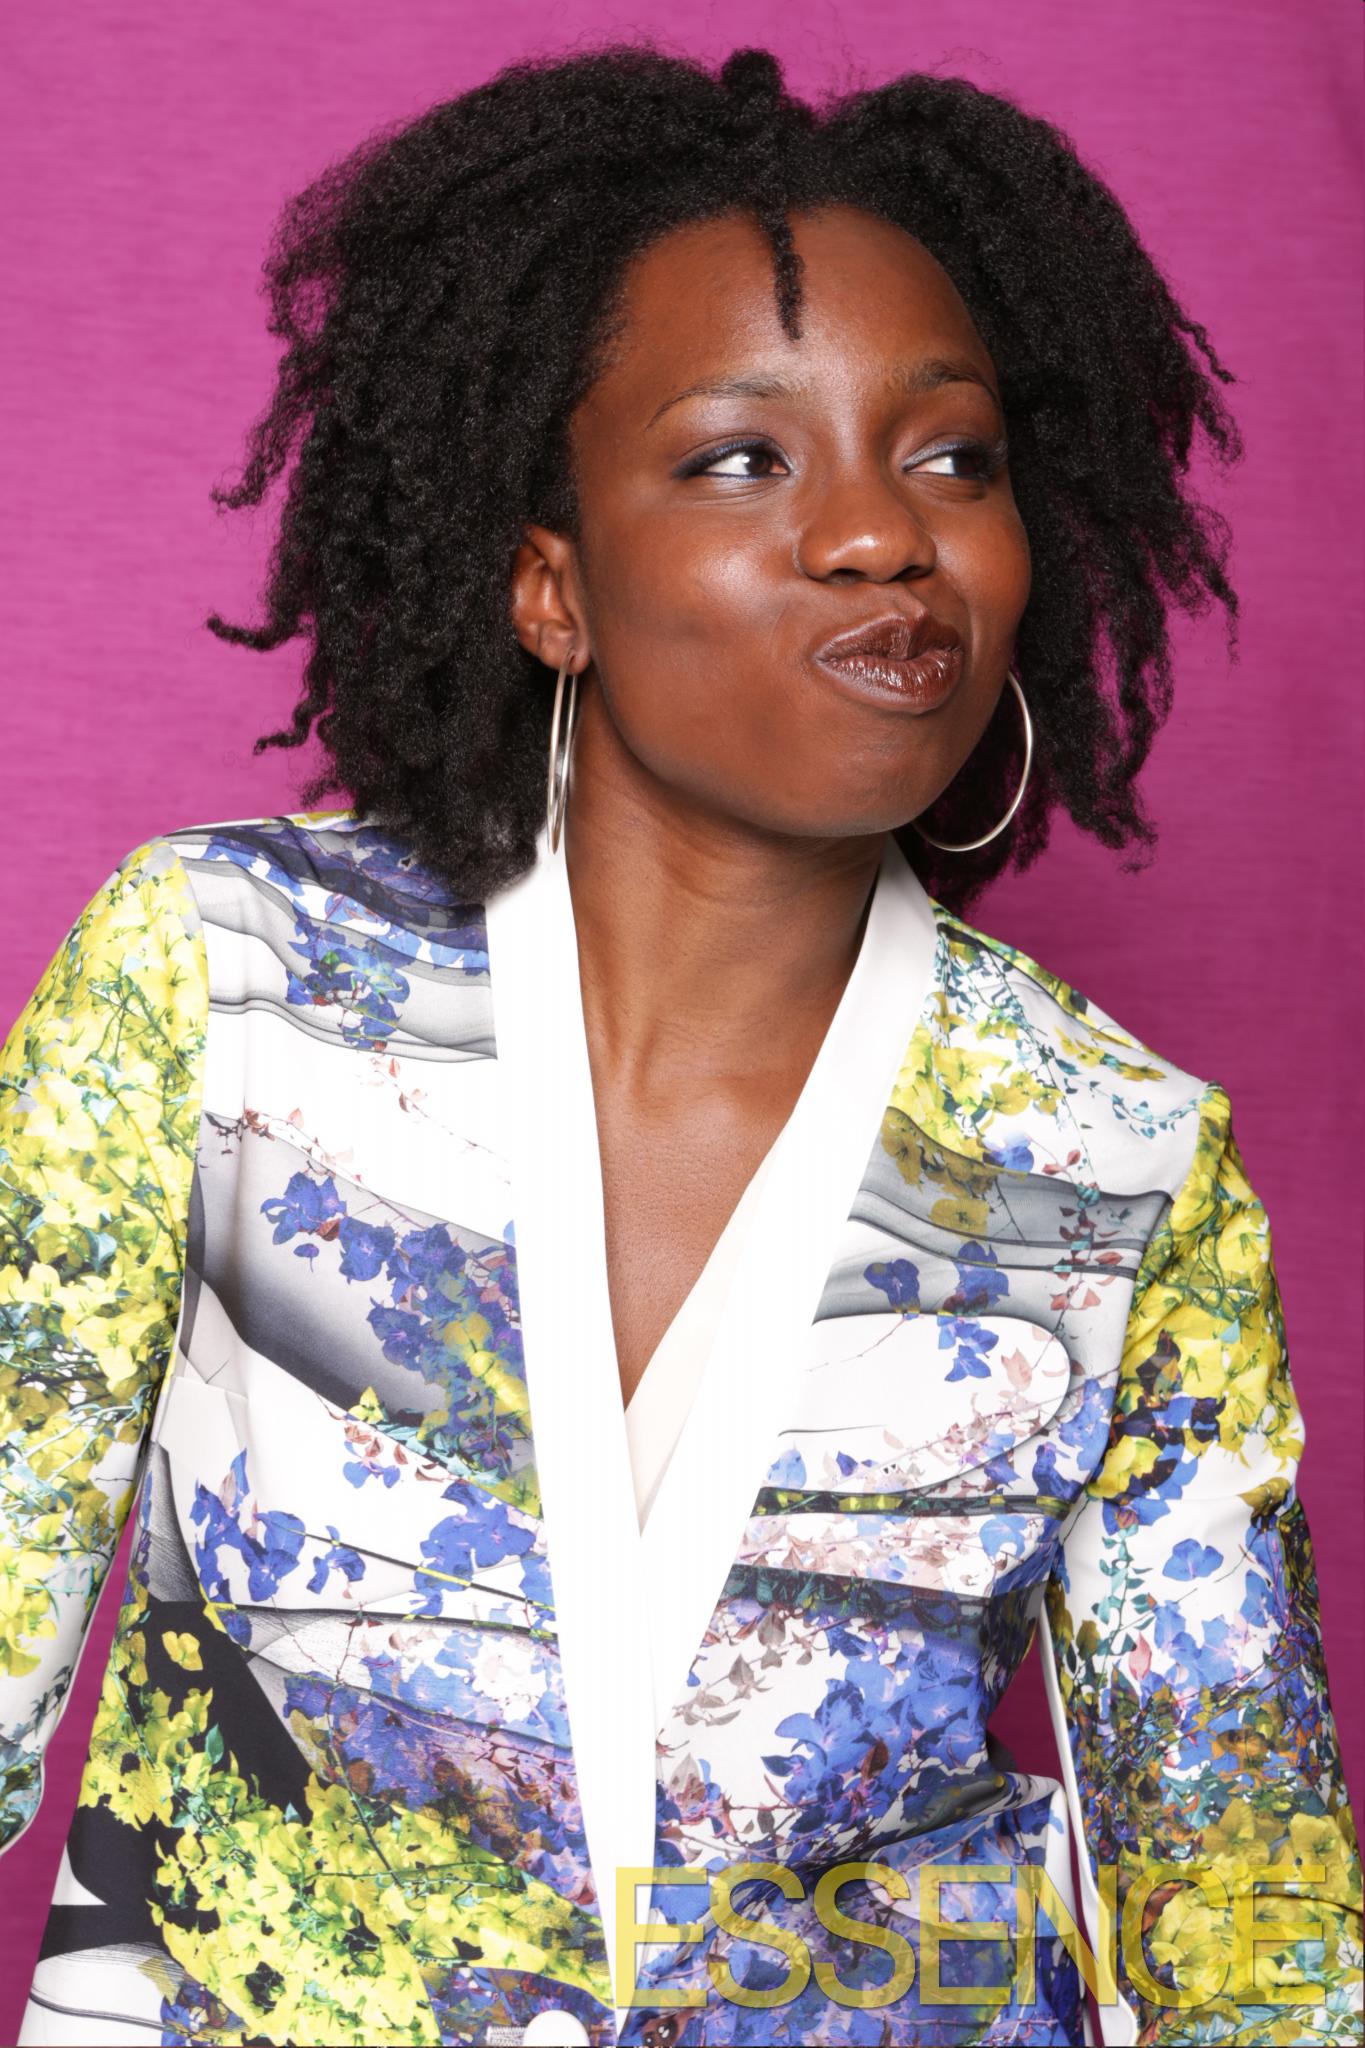 ESSENCE Black Women in Hollywood Photo Booth